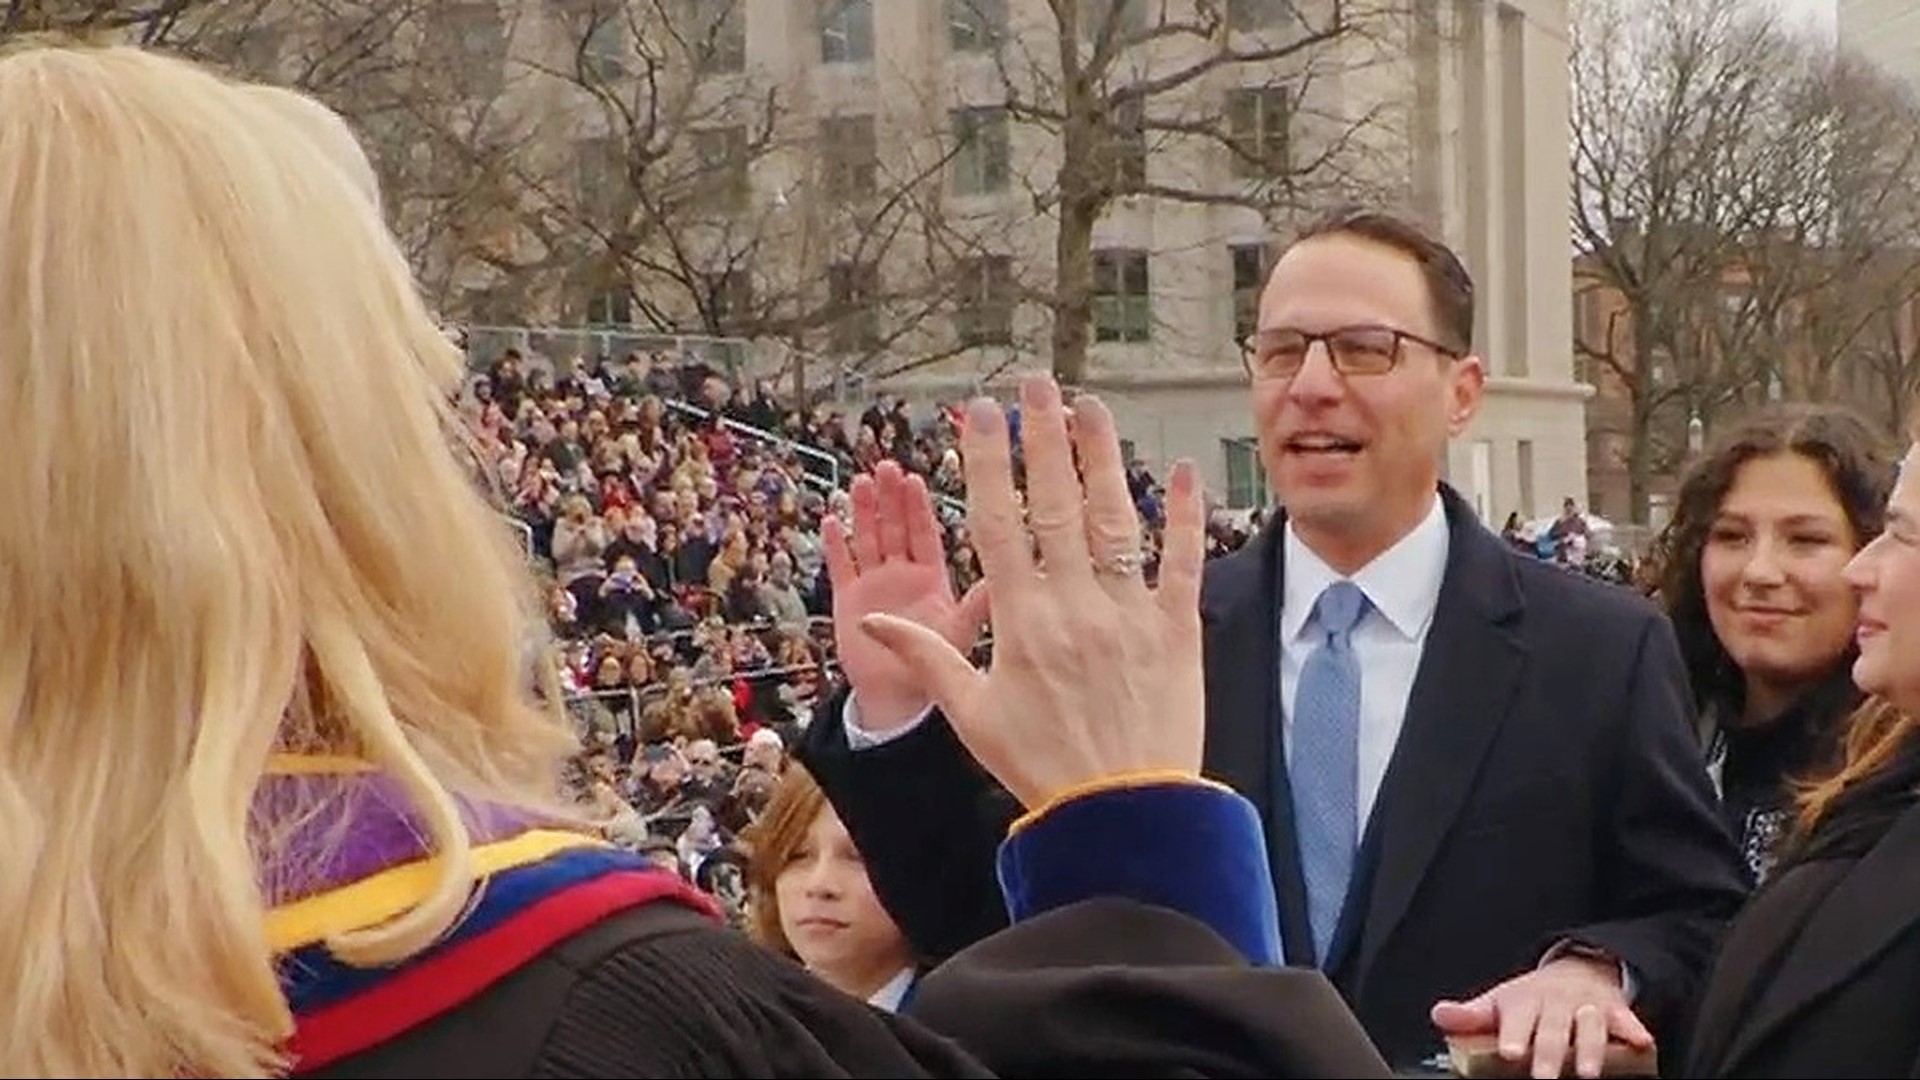 He's been governor for one week, and Josh Shapiro already faces his first controversy. It deals with what happened after the swearing-in, the inaugural ball.